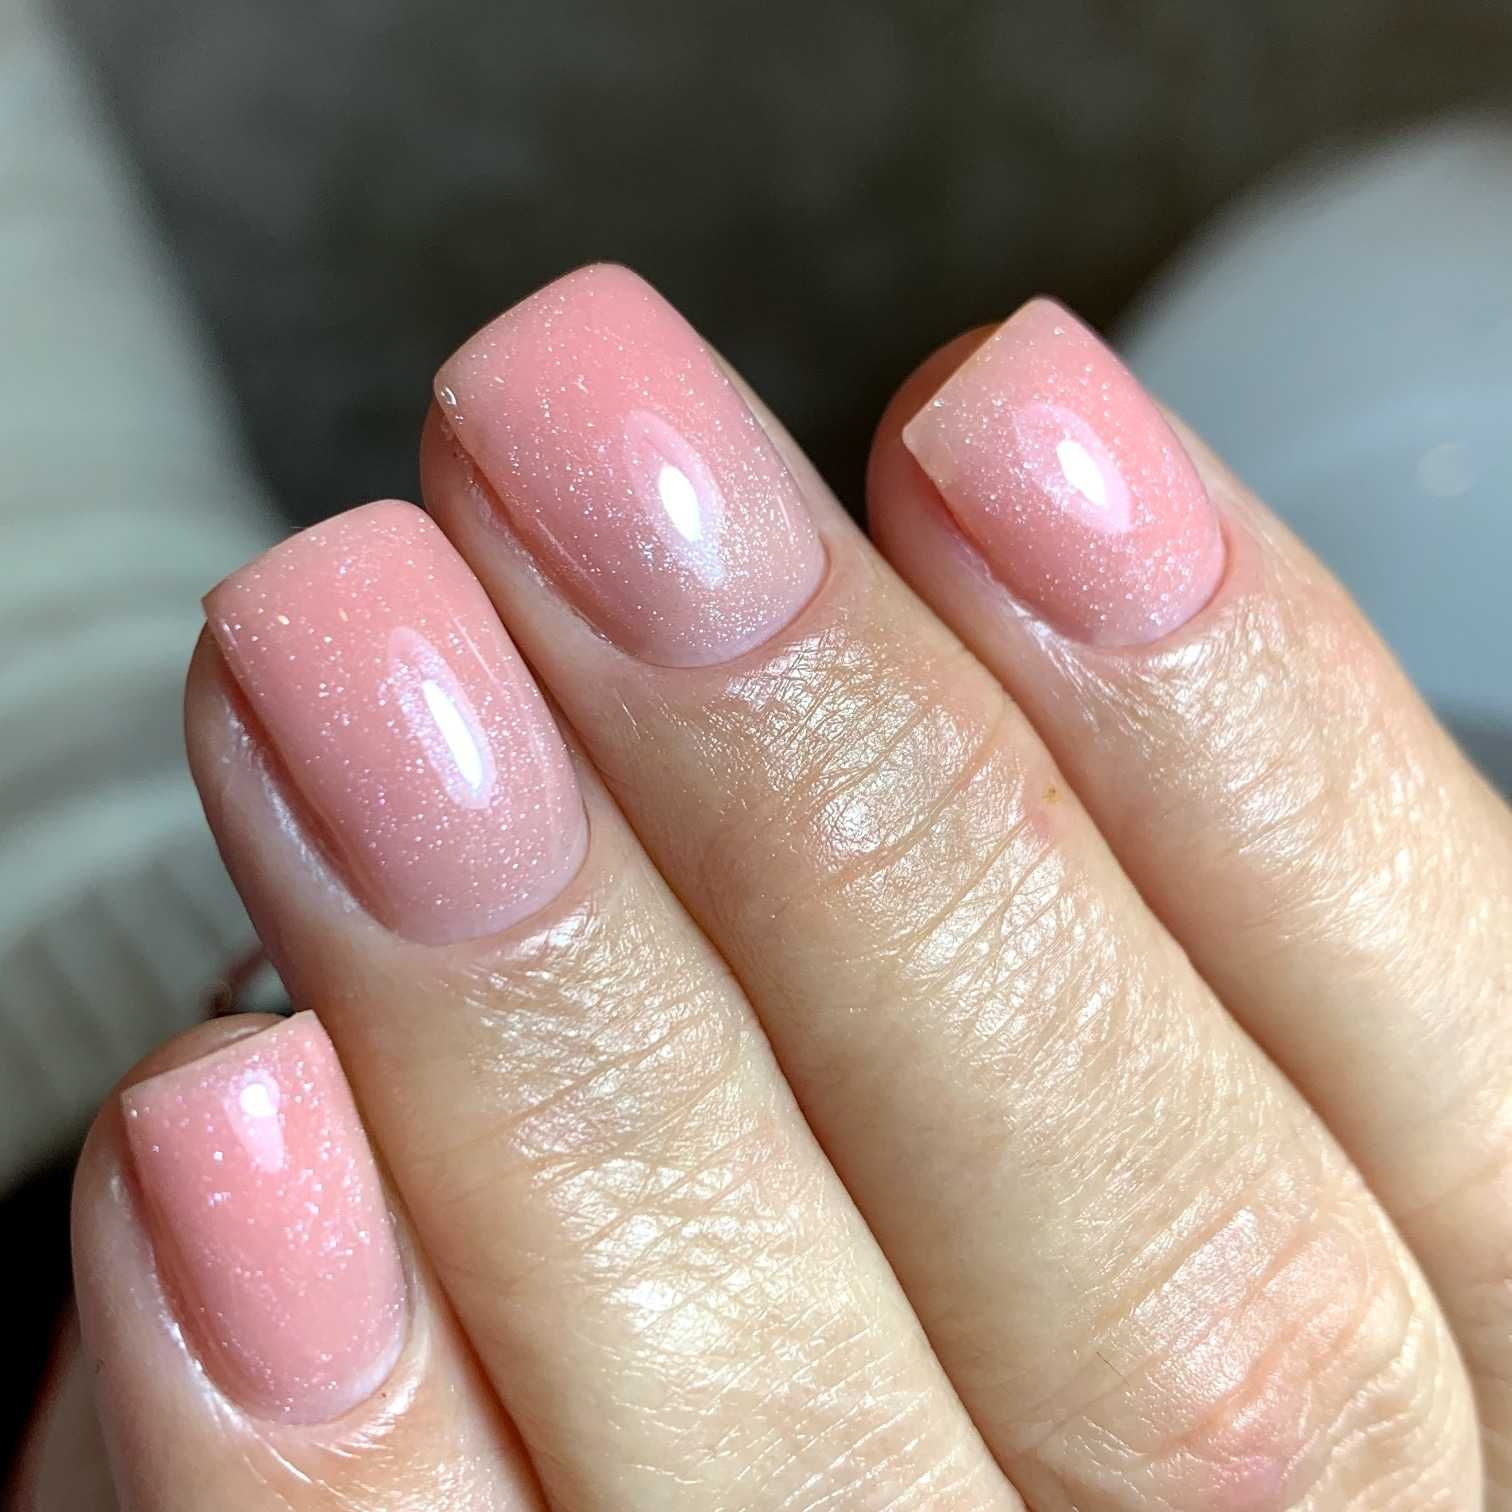 Manicure on the teremky